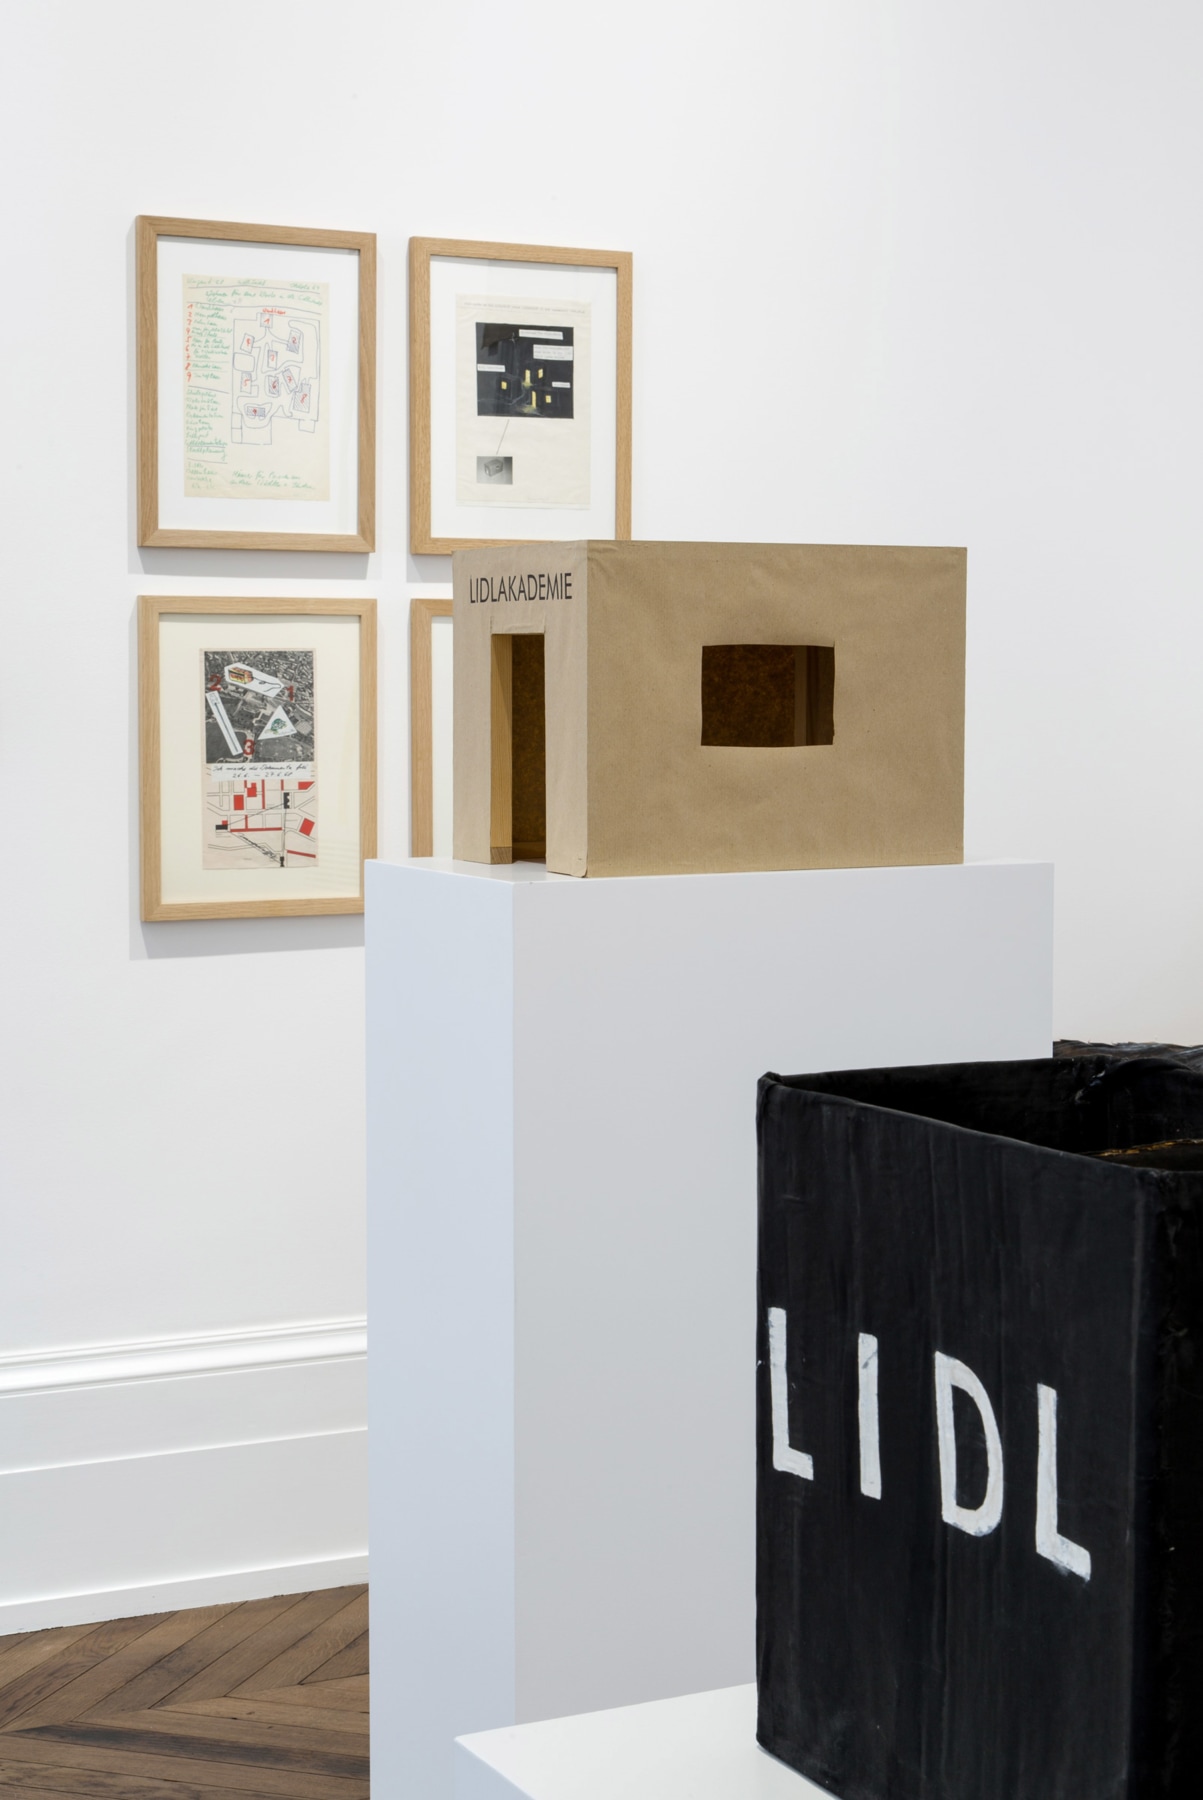 J&Ouml;RG IMMENDORFF LIDL Works and Performances from the 60s and Late Paintings after Hogarth 12 May through 2 July 2016 MAYFAIR, LONDON, Installation View 5